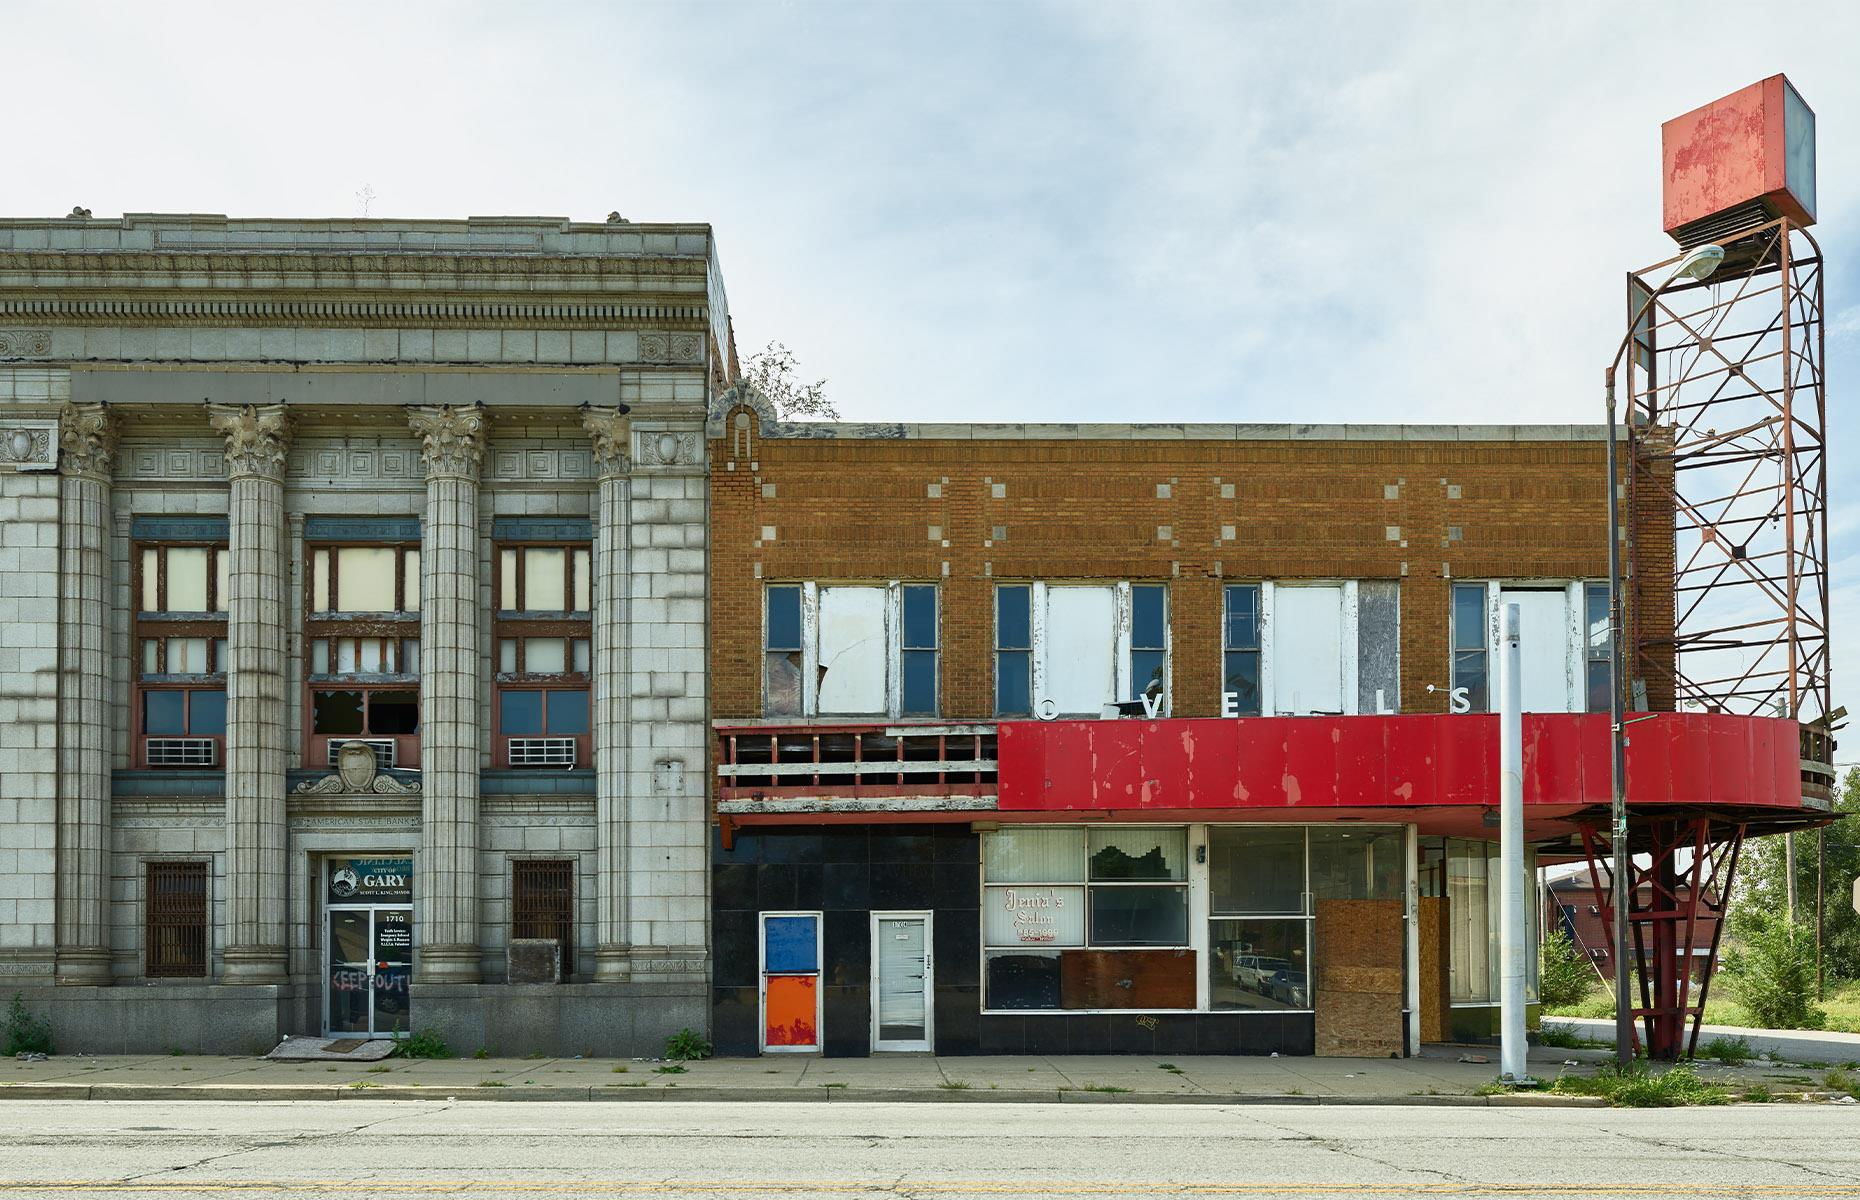 Abandoned downtowns across America